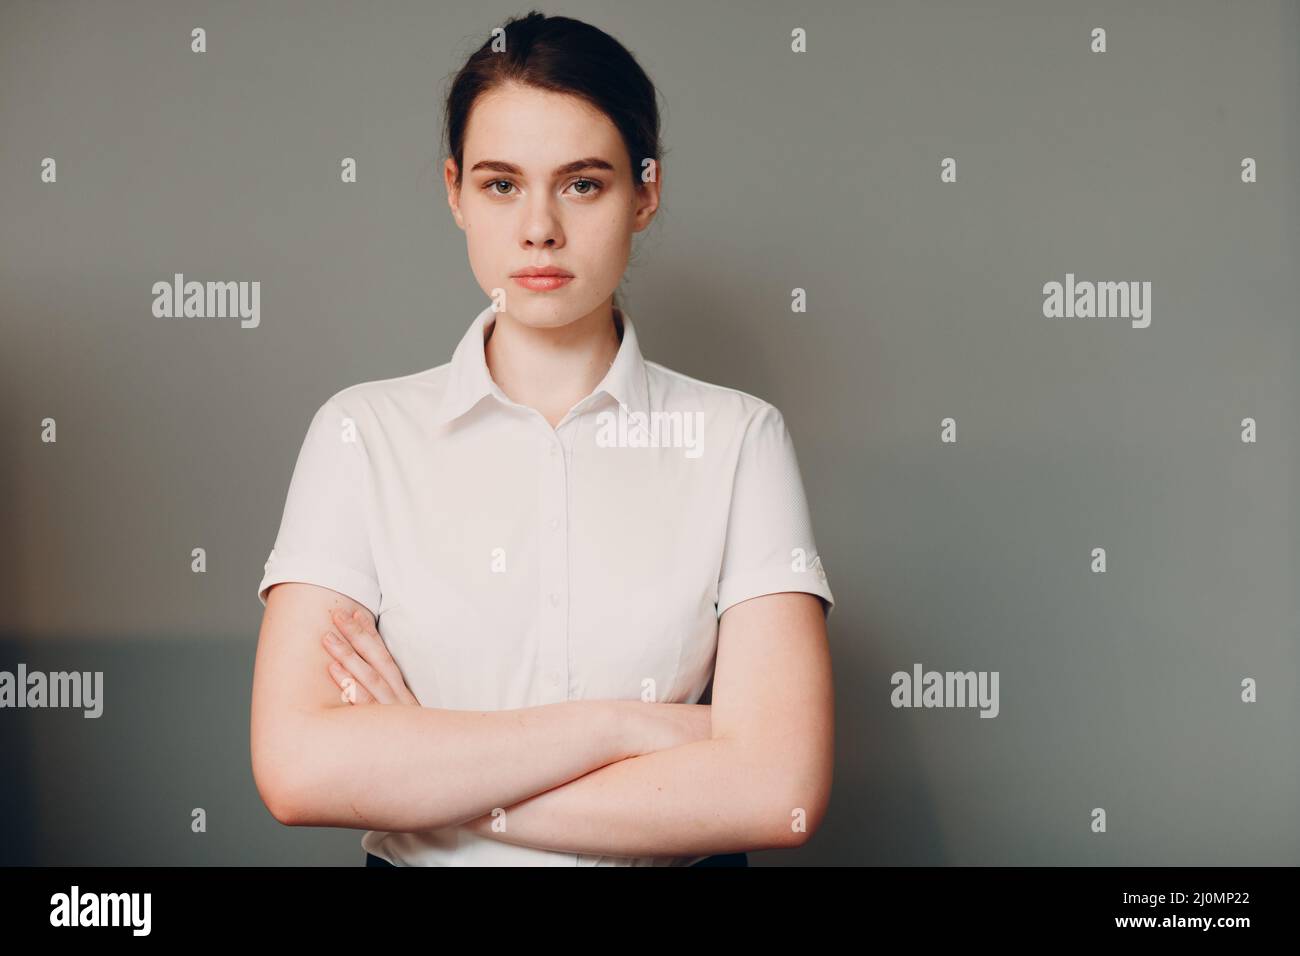 Business young woman 20 25 years old portrait in white shirt standing at office Stock Photo